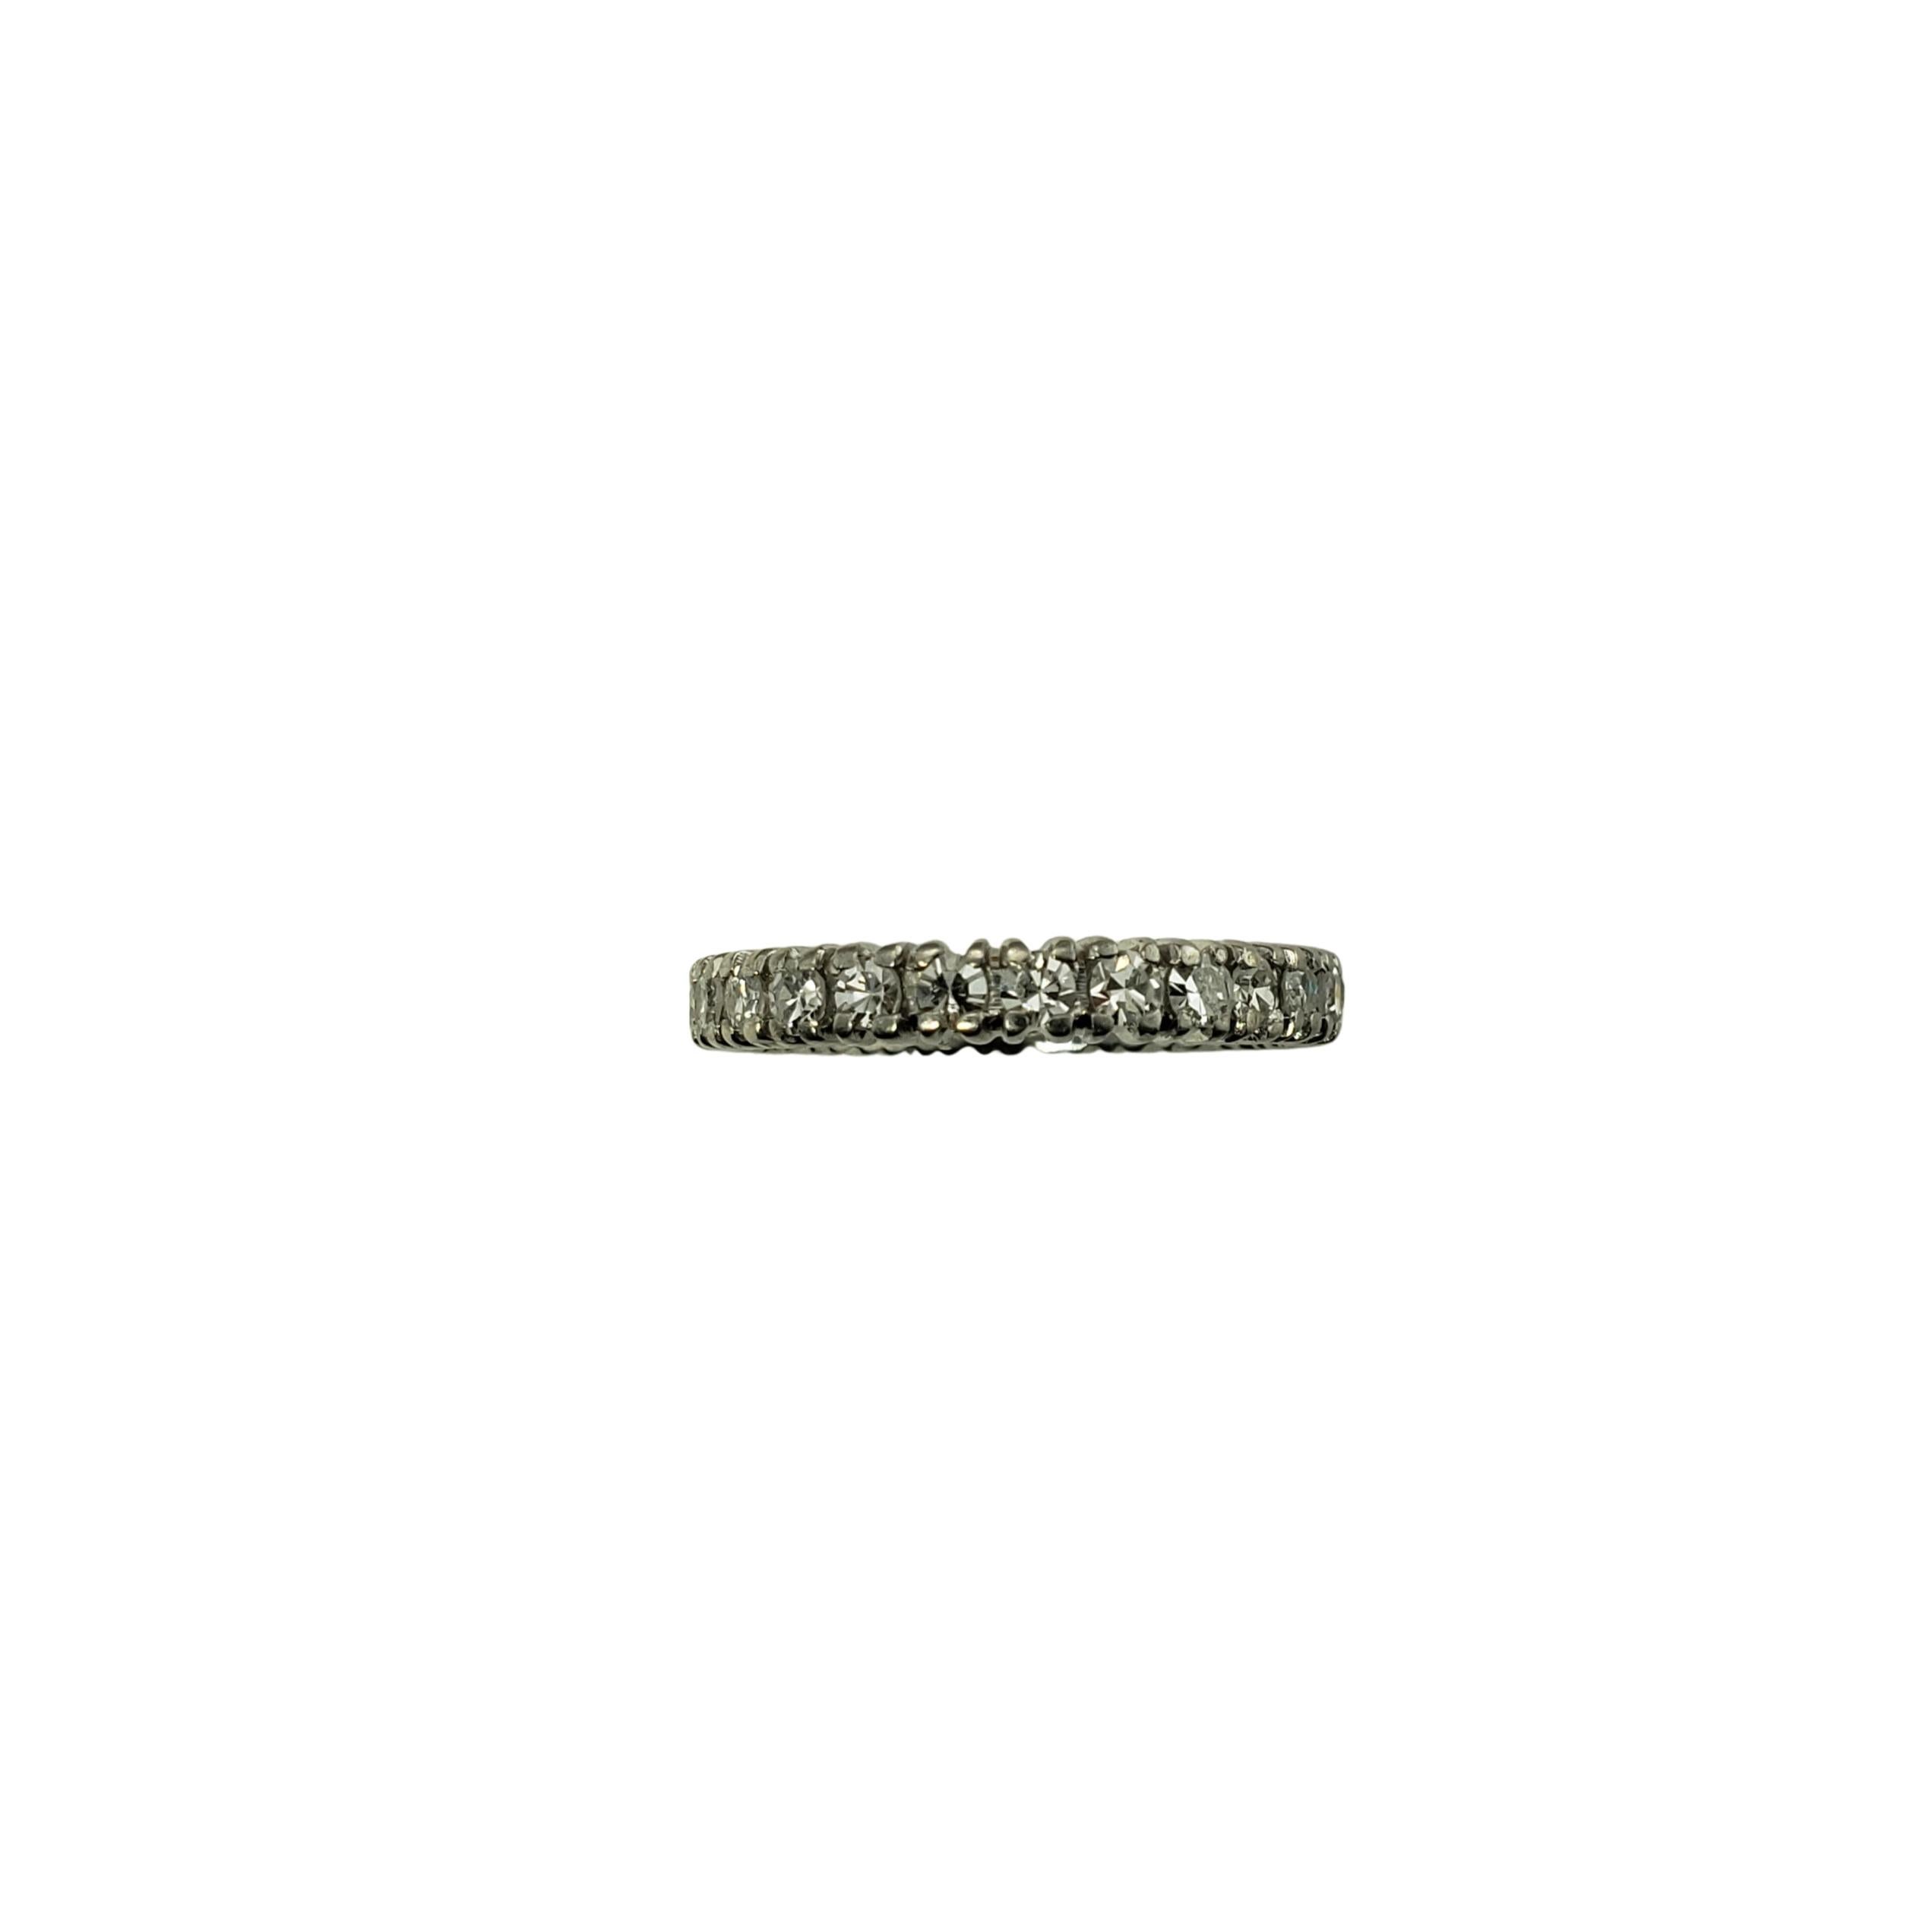 Vintage Platinum Diamond Eternity Band Ring Size 6.75-

This sparkling eternity band features 25 round single cut diamonds set in classic platinum. Width: 3 mm.

Approximate total diamond weight: 1.25 ct.

Diamond clarity: SI1-VS2

Diamond color: